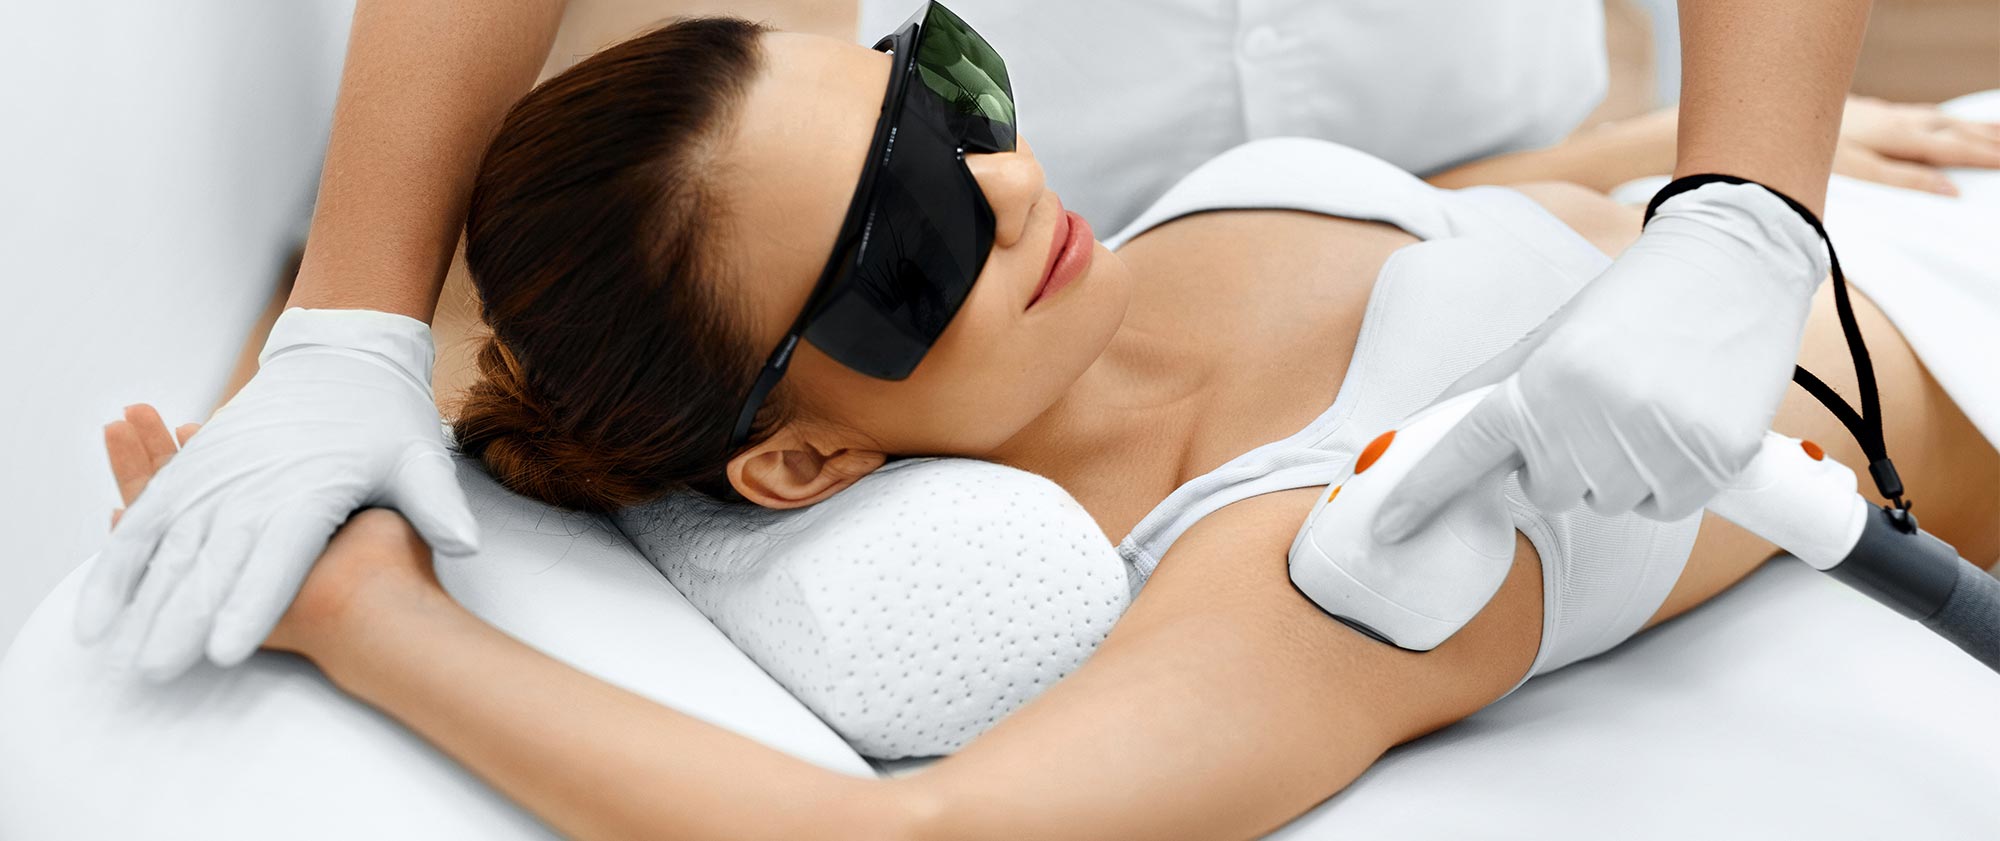 The Battle of the anti-ageing treatments. Does Laser reduce wrinkles?